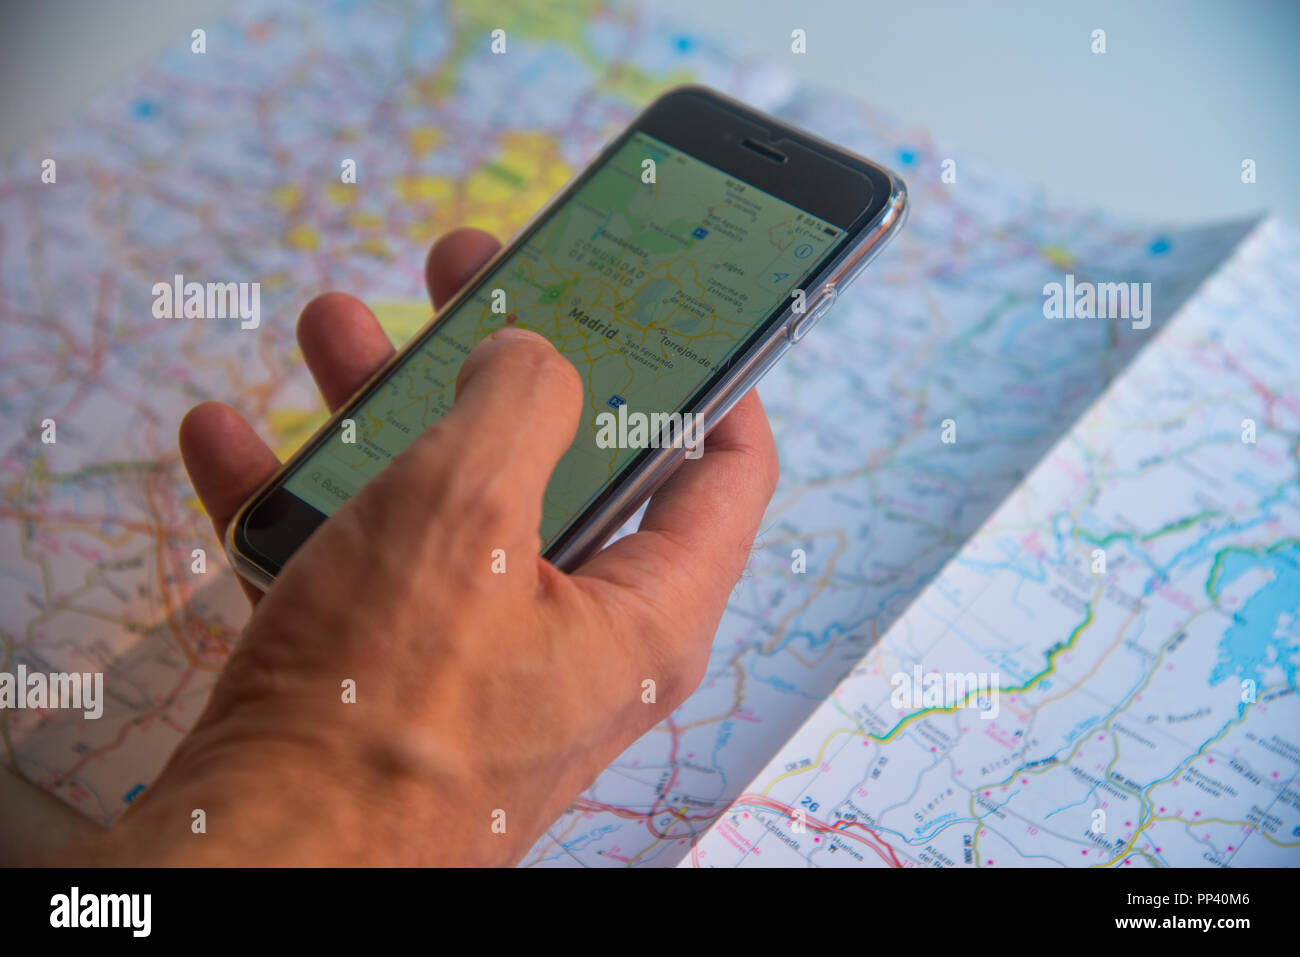 Man's hand using smartphone with map and road map as a background. Stock Photo